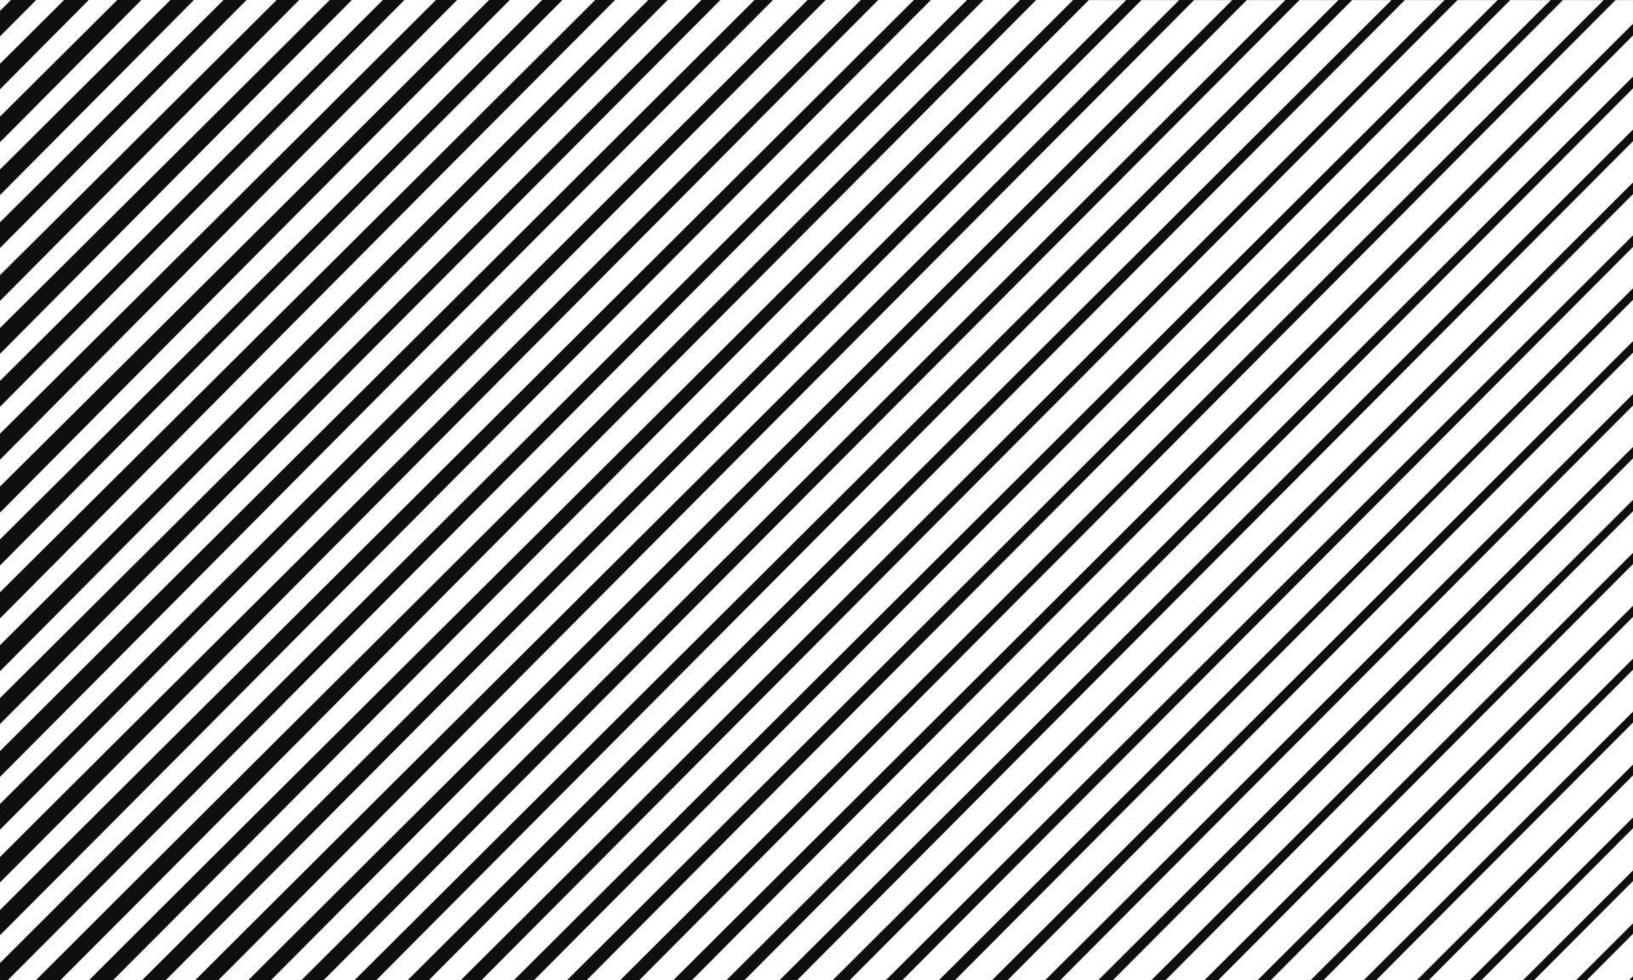 Abstract Diagonal Straight Lines Pattern Background vector